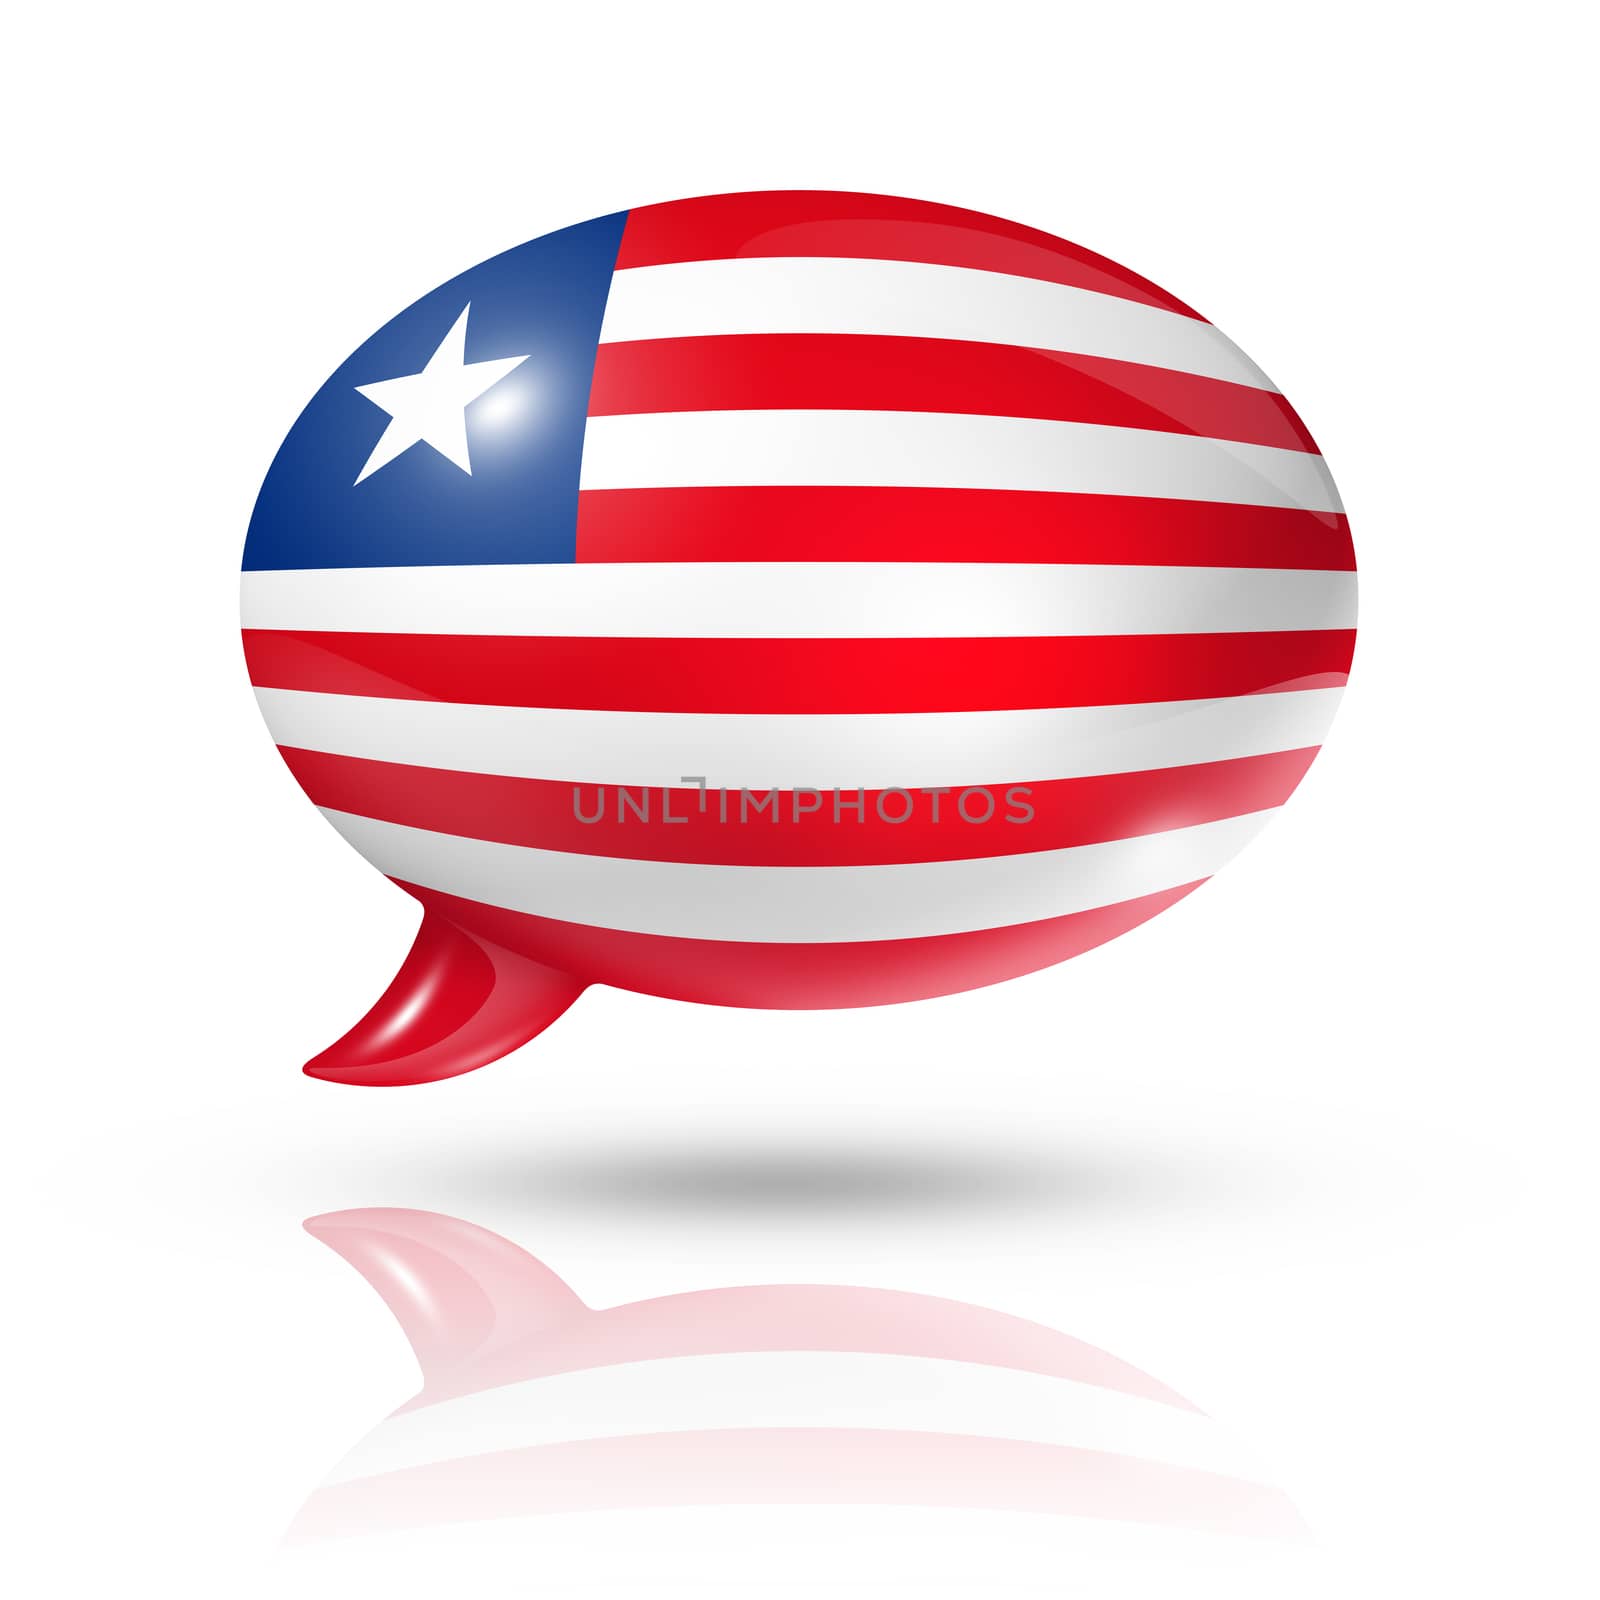 three dimensional Liberia flag in a speech bubble isolated on white with clipping path